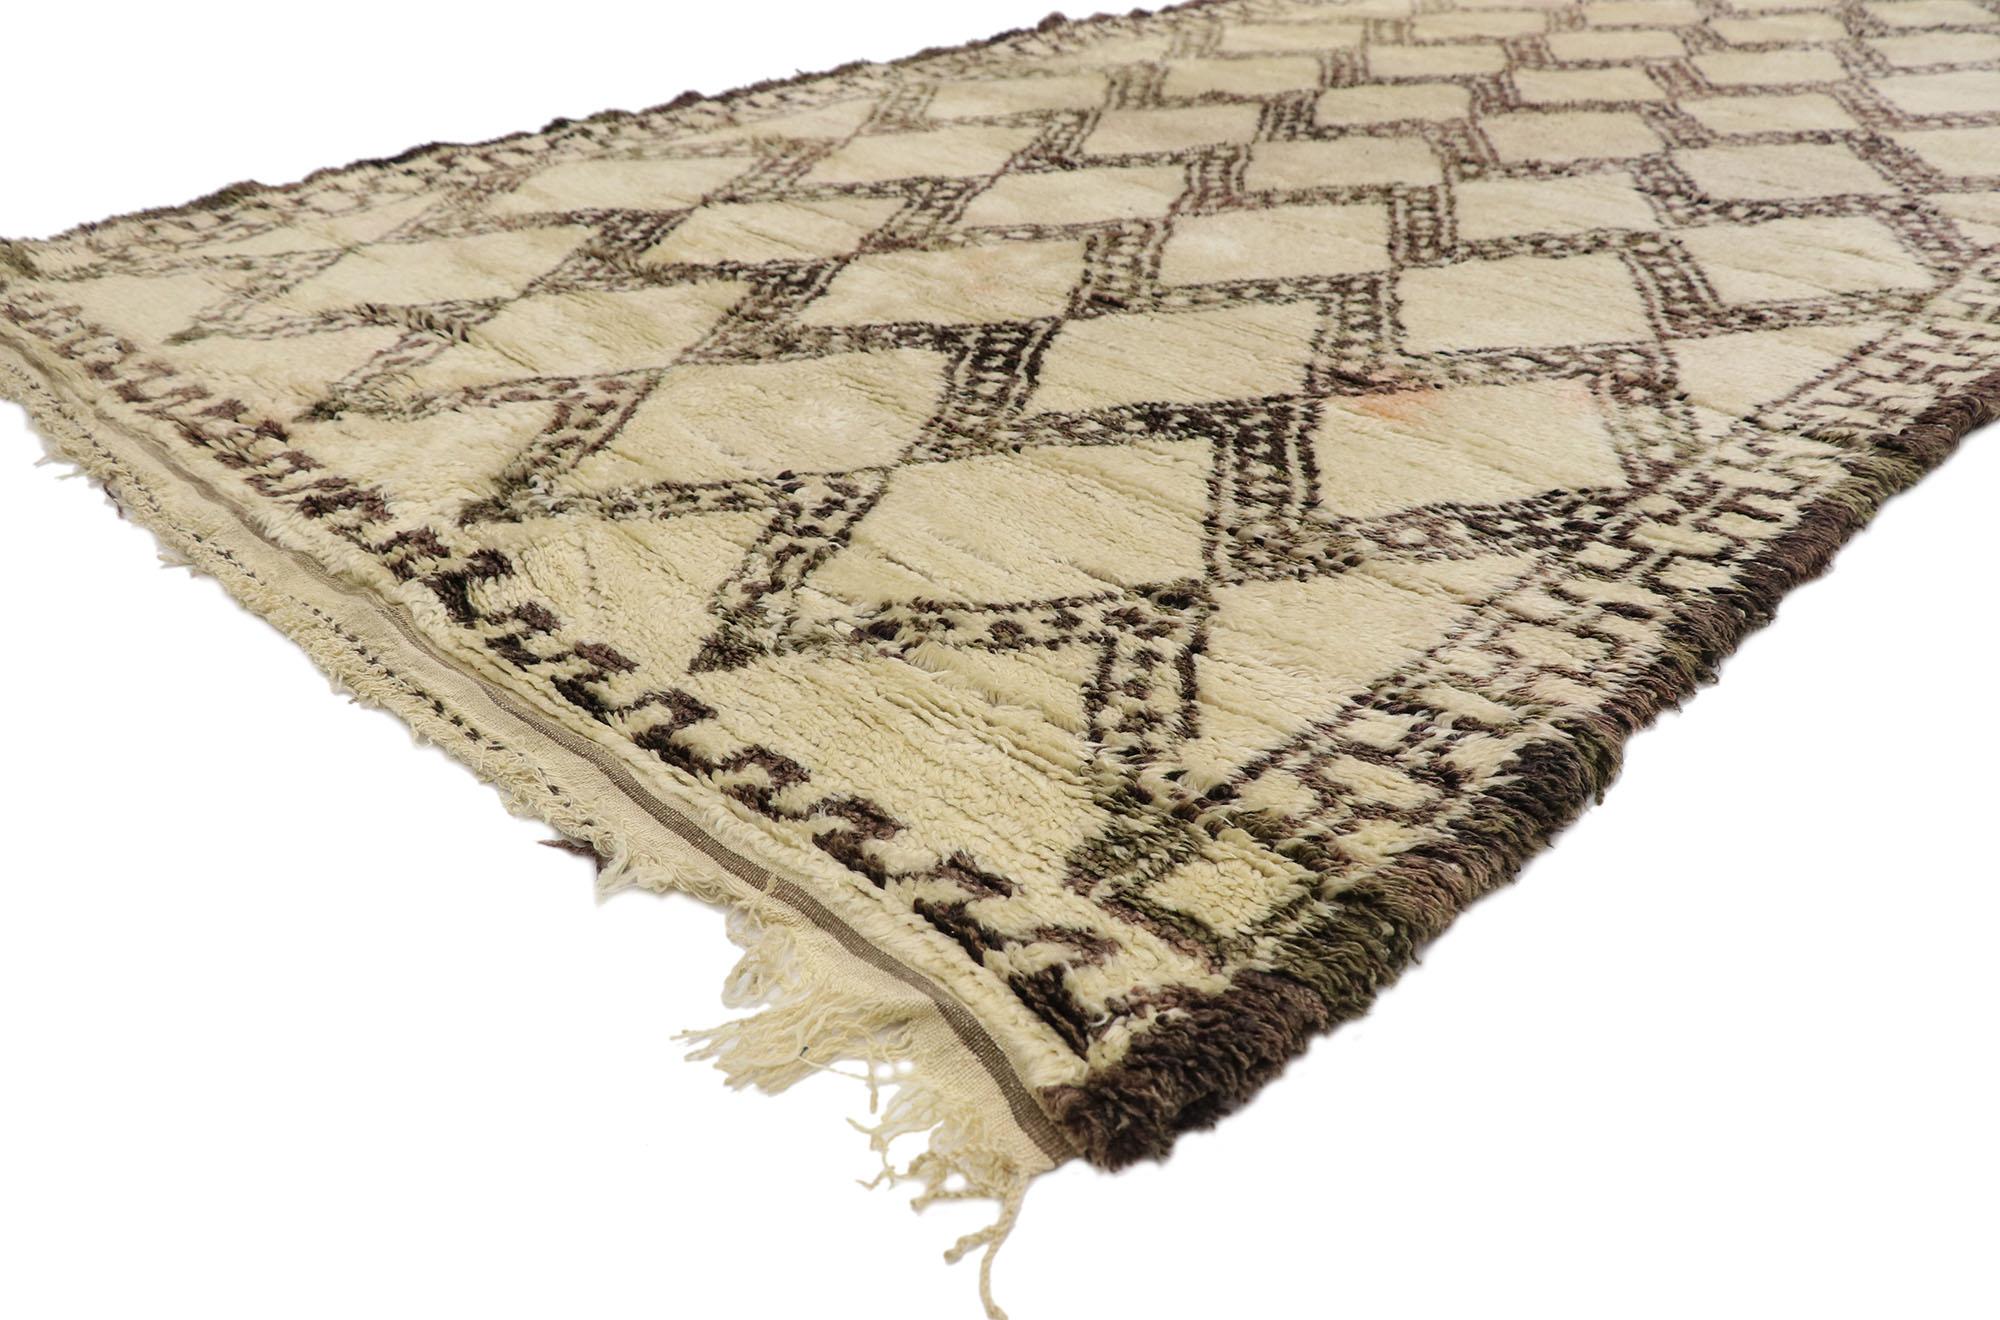 21385, vintage Berber Beni Ourain Moroccan rug with Mid-Century Modern Style. With its simplicity, plush pile and Mid-Century Modern style, this hand knotted wool vintage Berber Beni Ourain Moroccan rug is a captivating vision of woven beauty. It